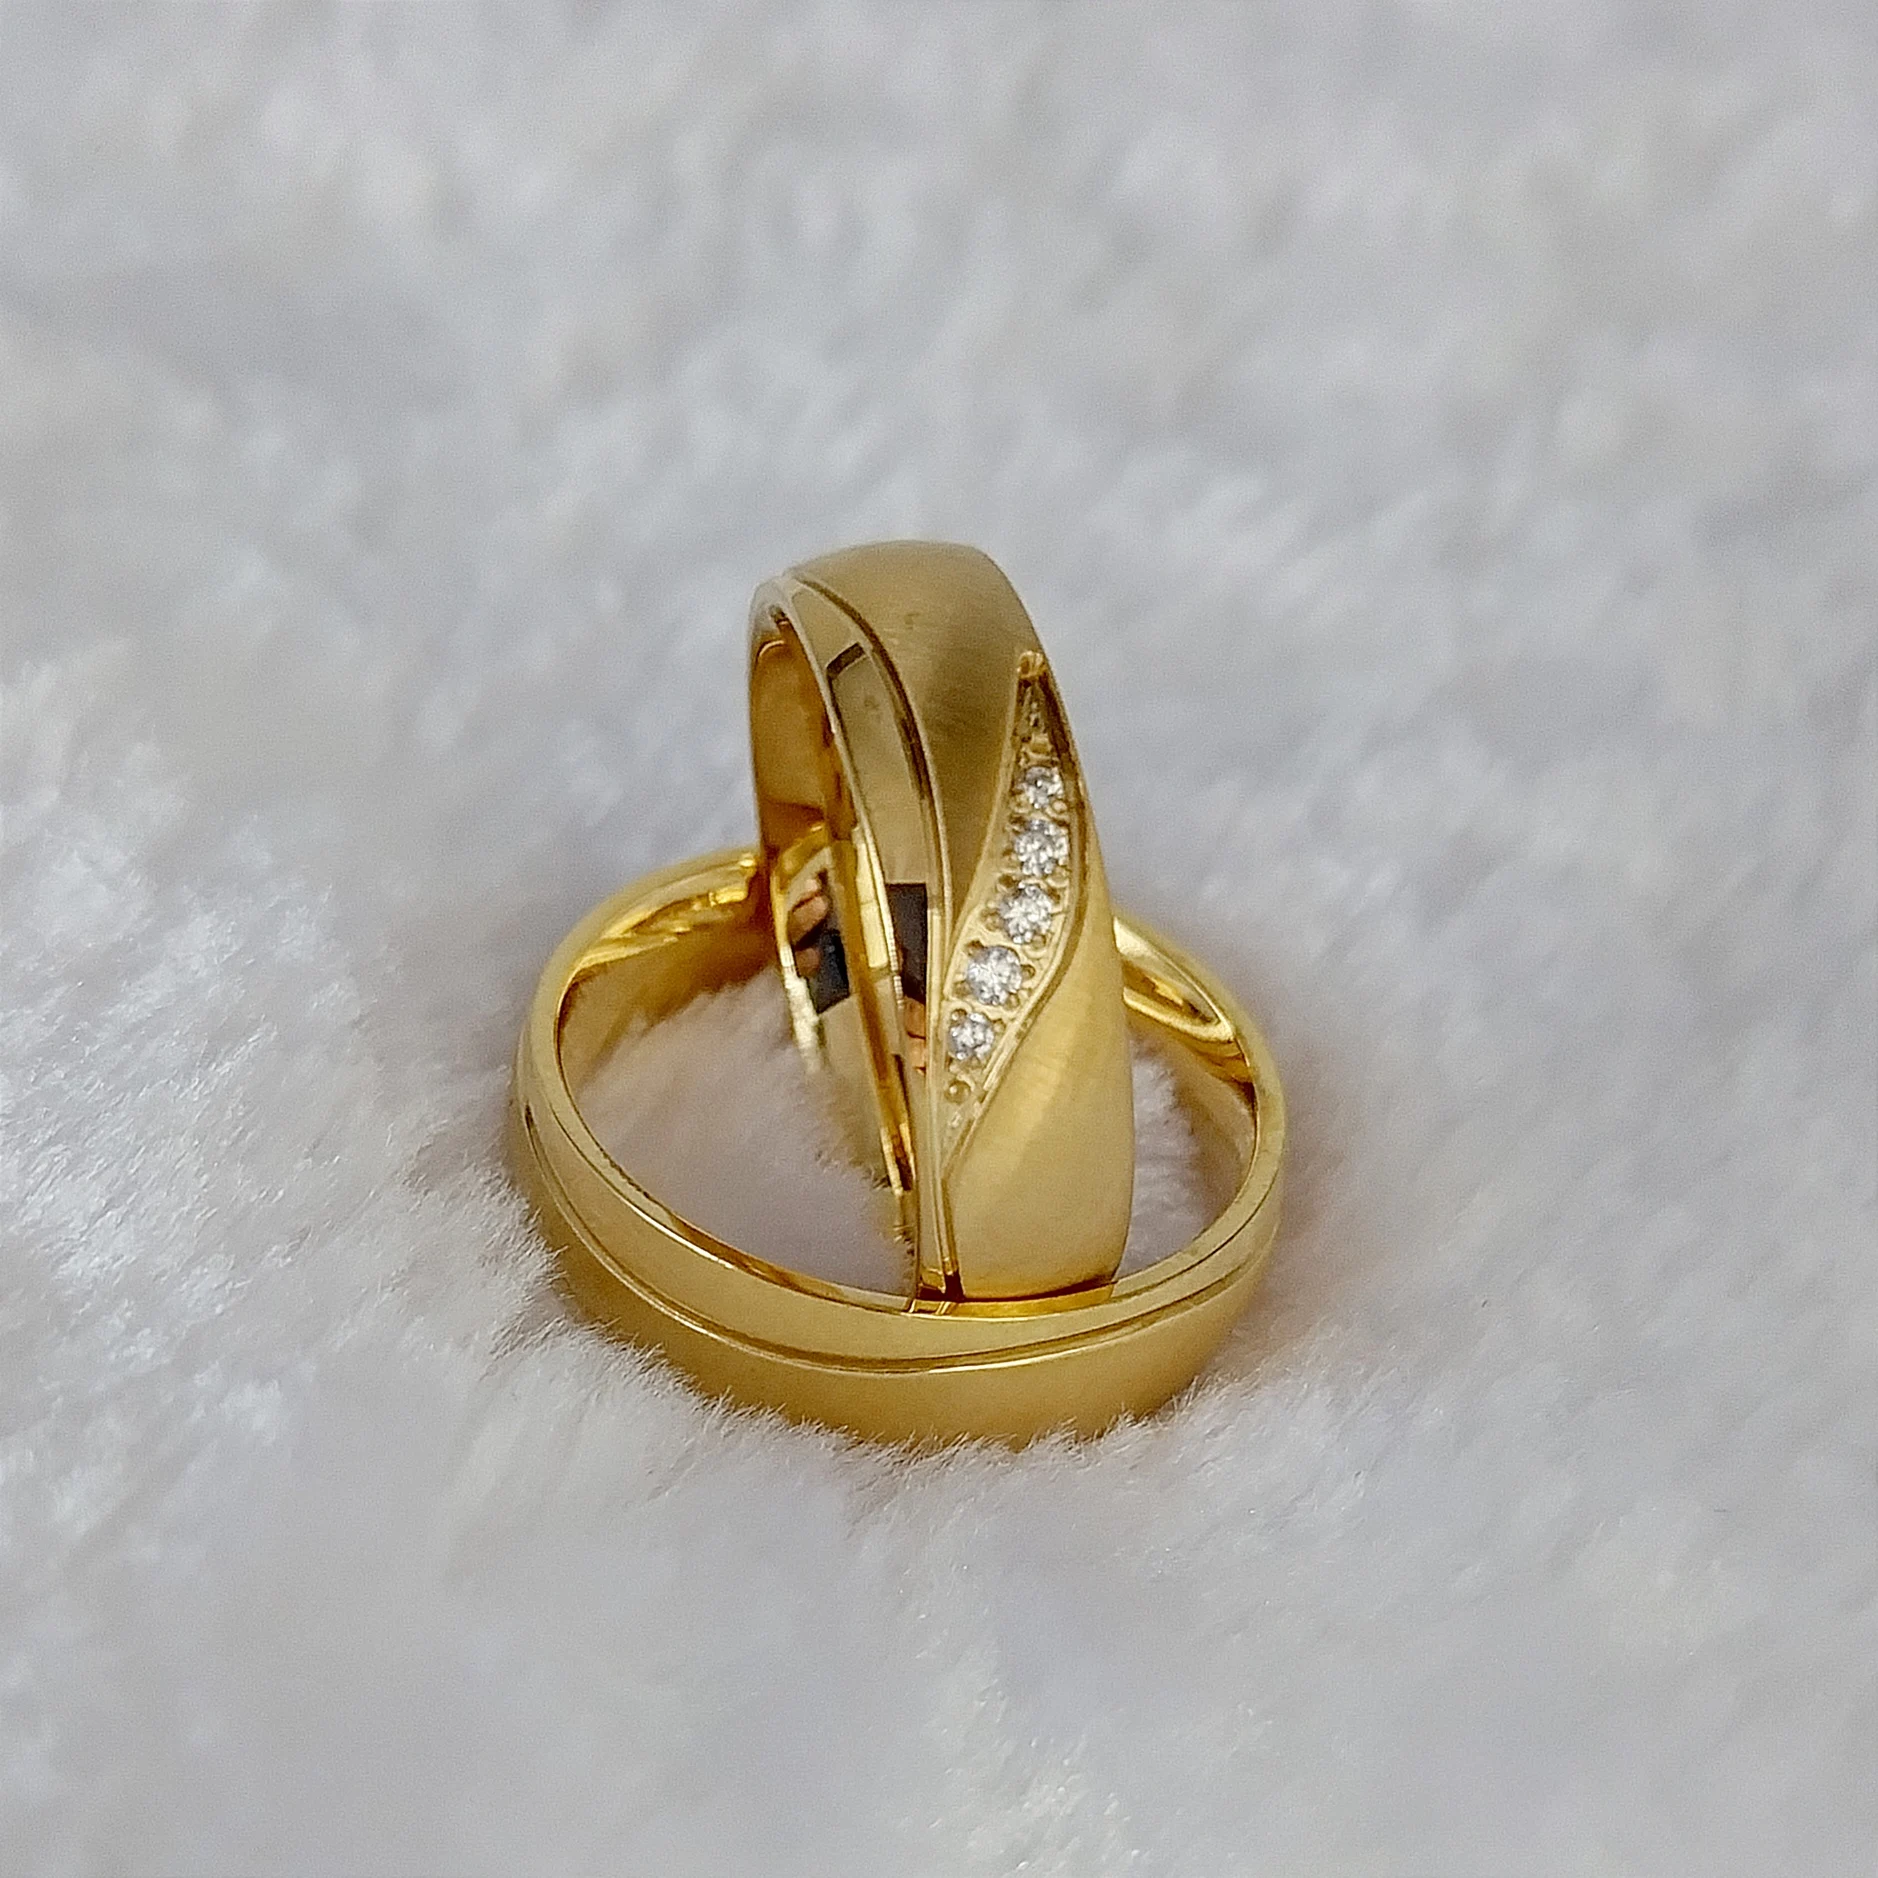 Fashion Western 24k Gold Plated Stainless Steel Jewelry Ring Marriage Couples Wedding Rings Men and Women